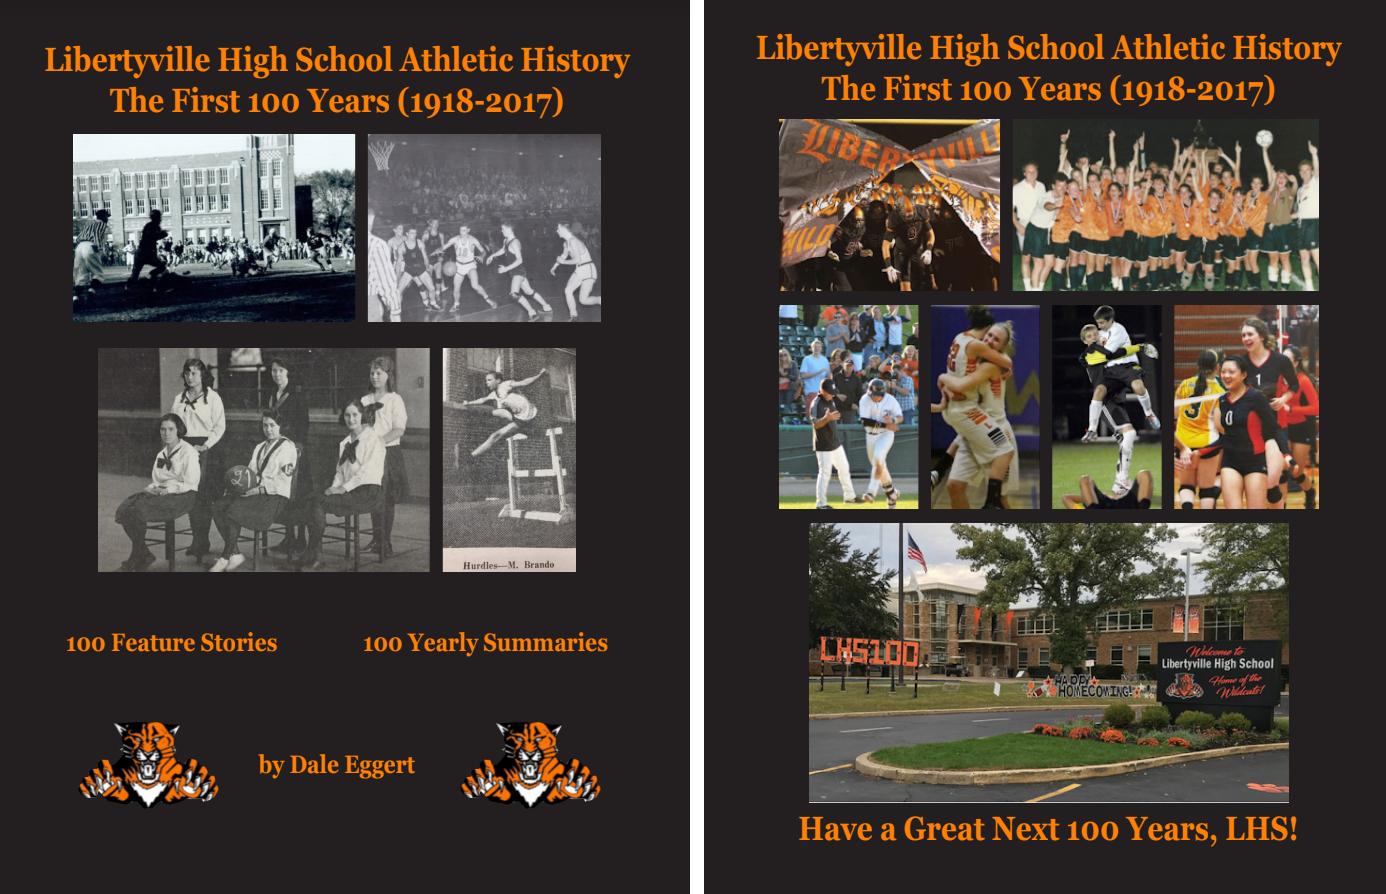 Front and Back Covers of LHS Athletic History Book by Dale Eggert